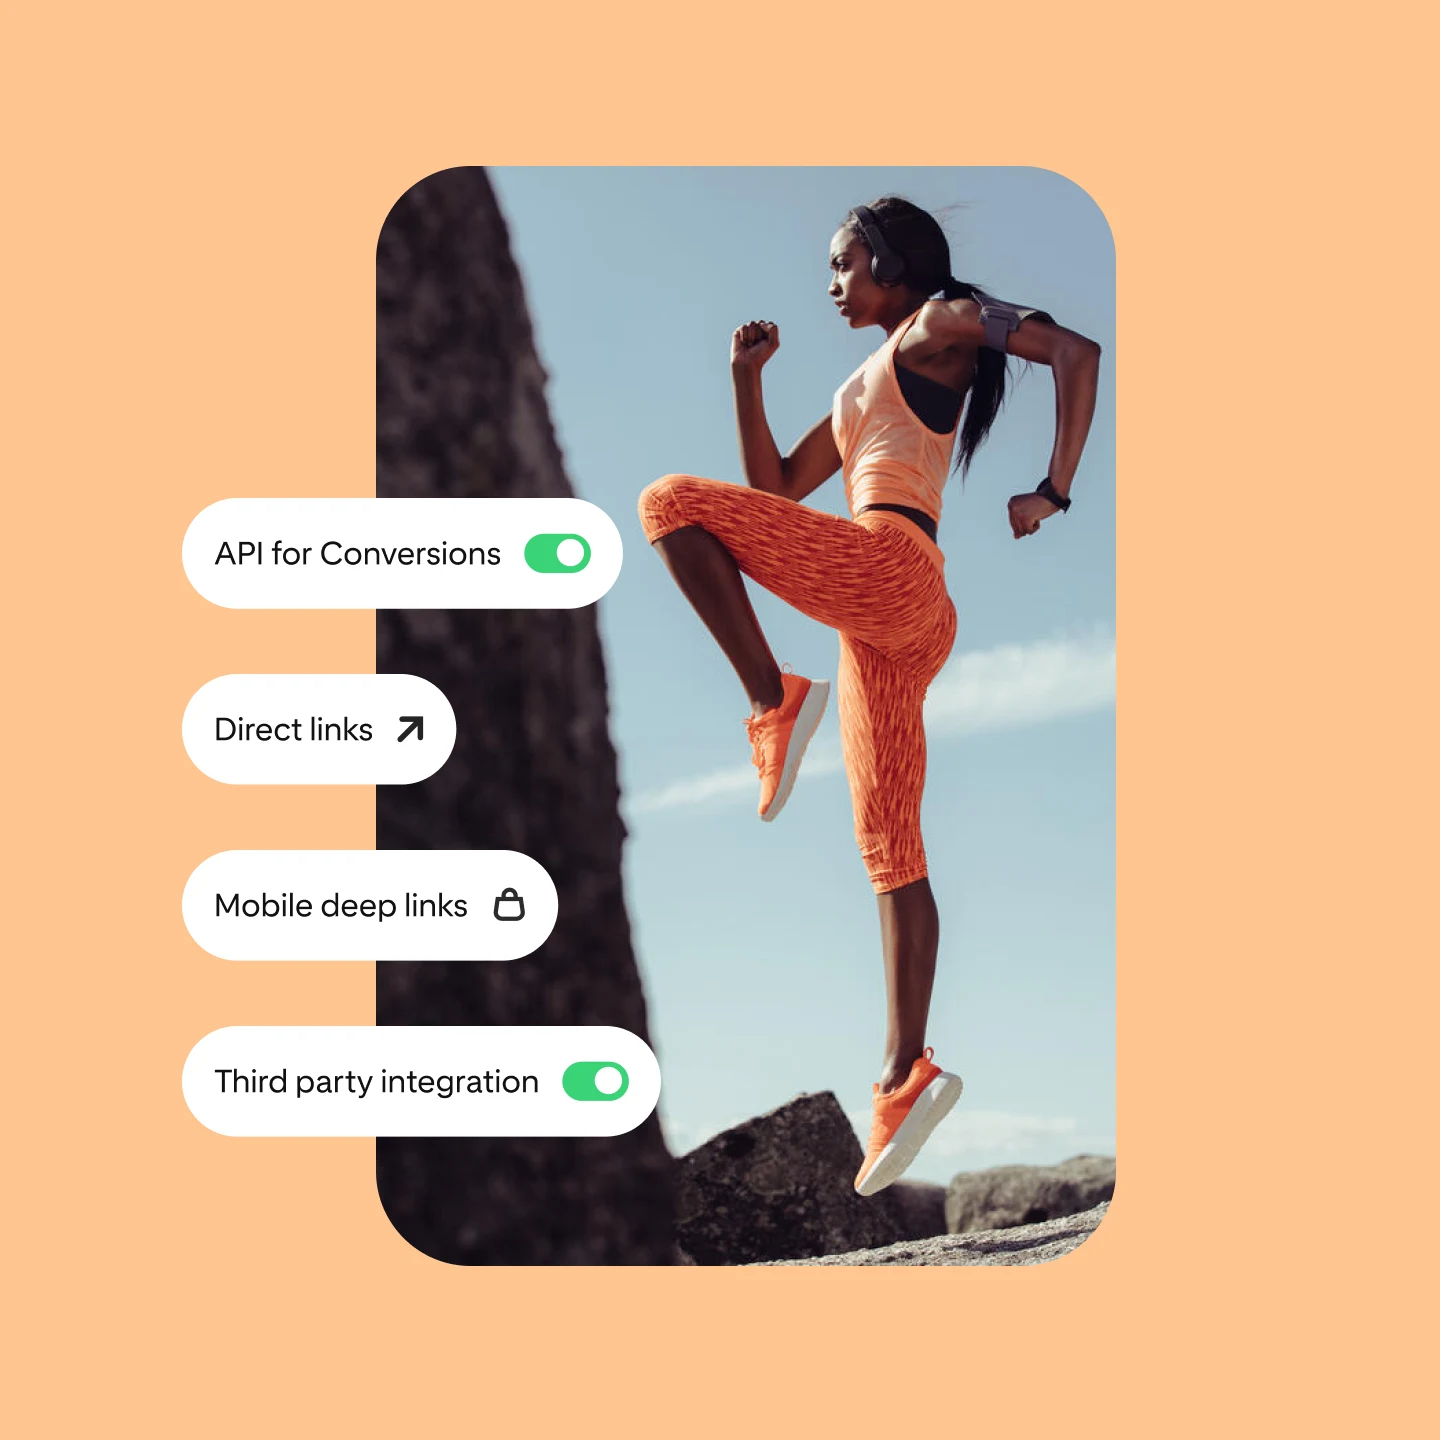 Image shows multiple Pinterest performance solutions, along with a woman performing an outside workout in orange workout apparel.